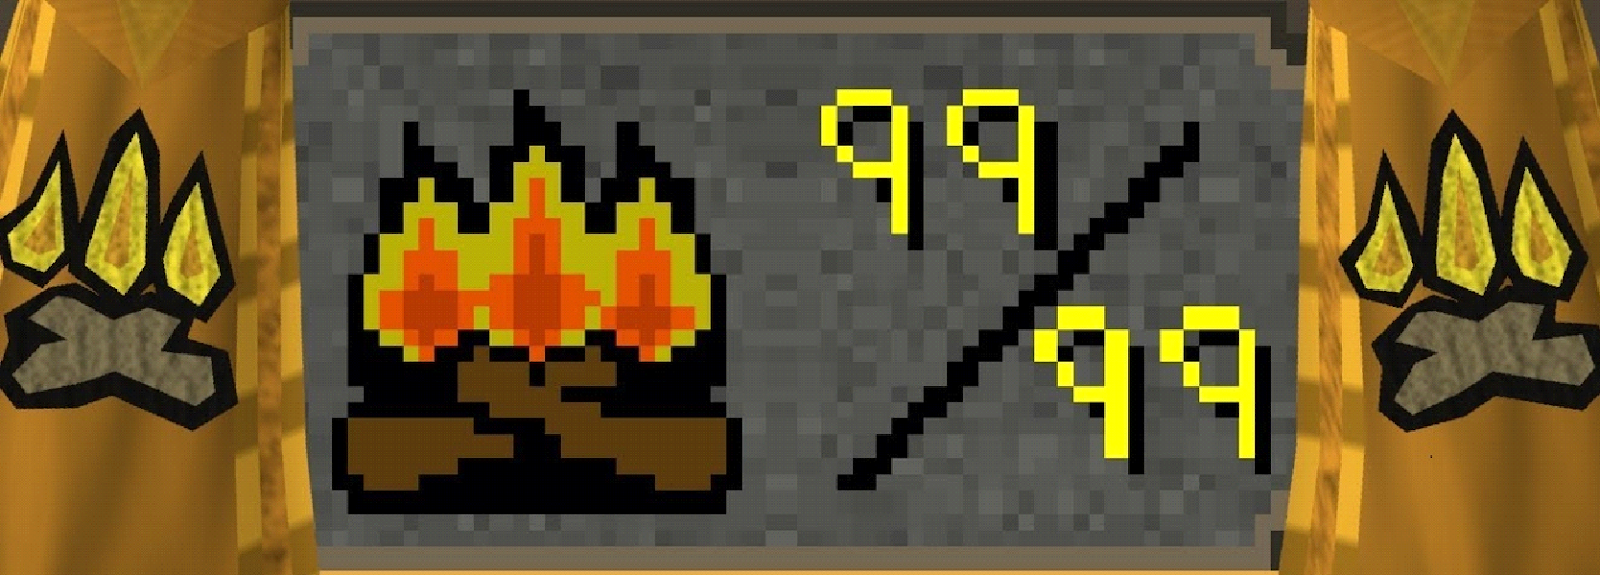 firemaking guide osrs